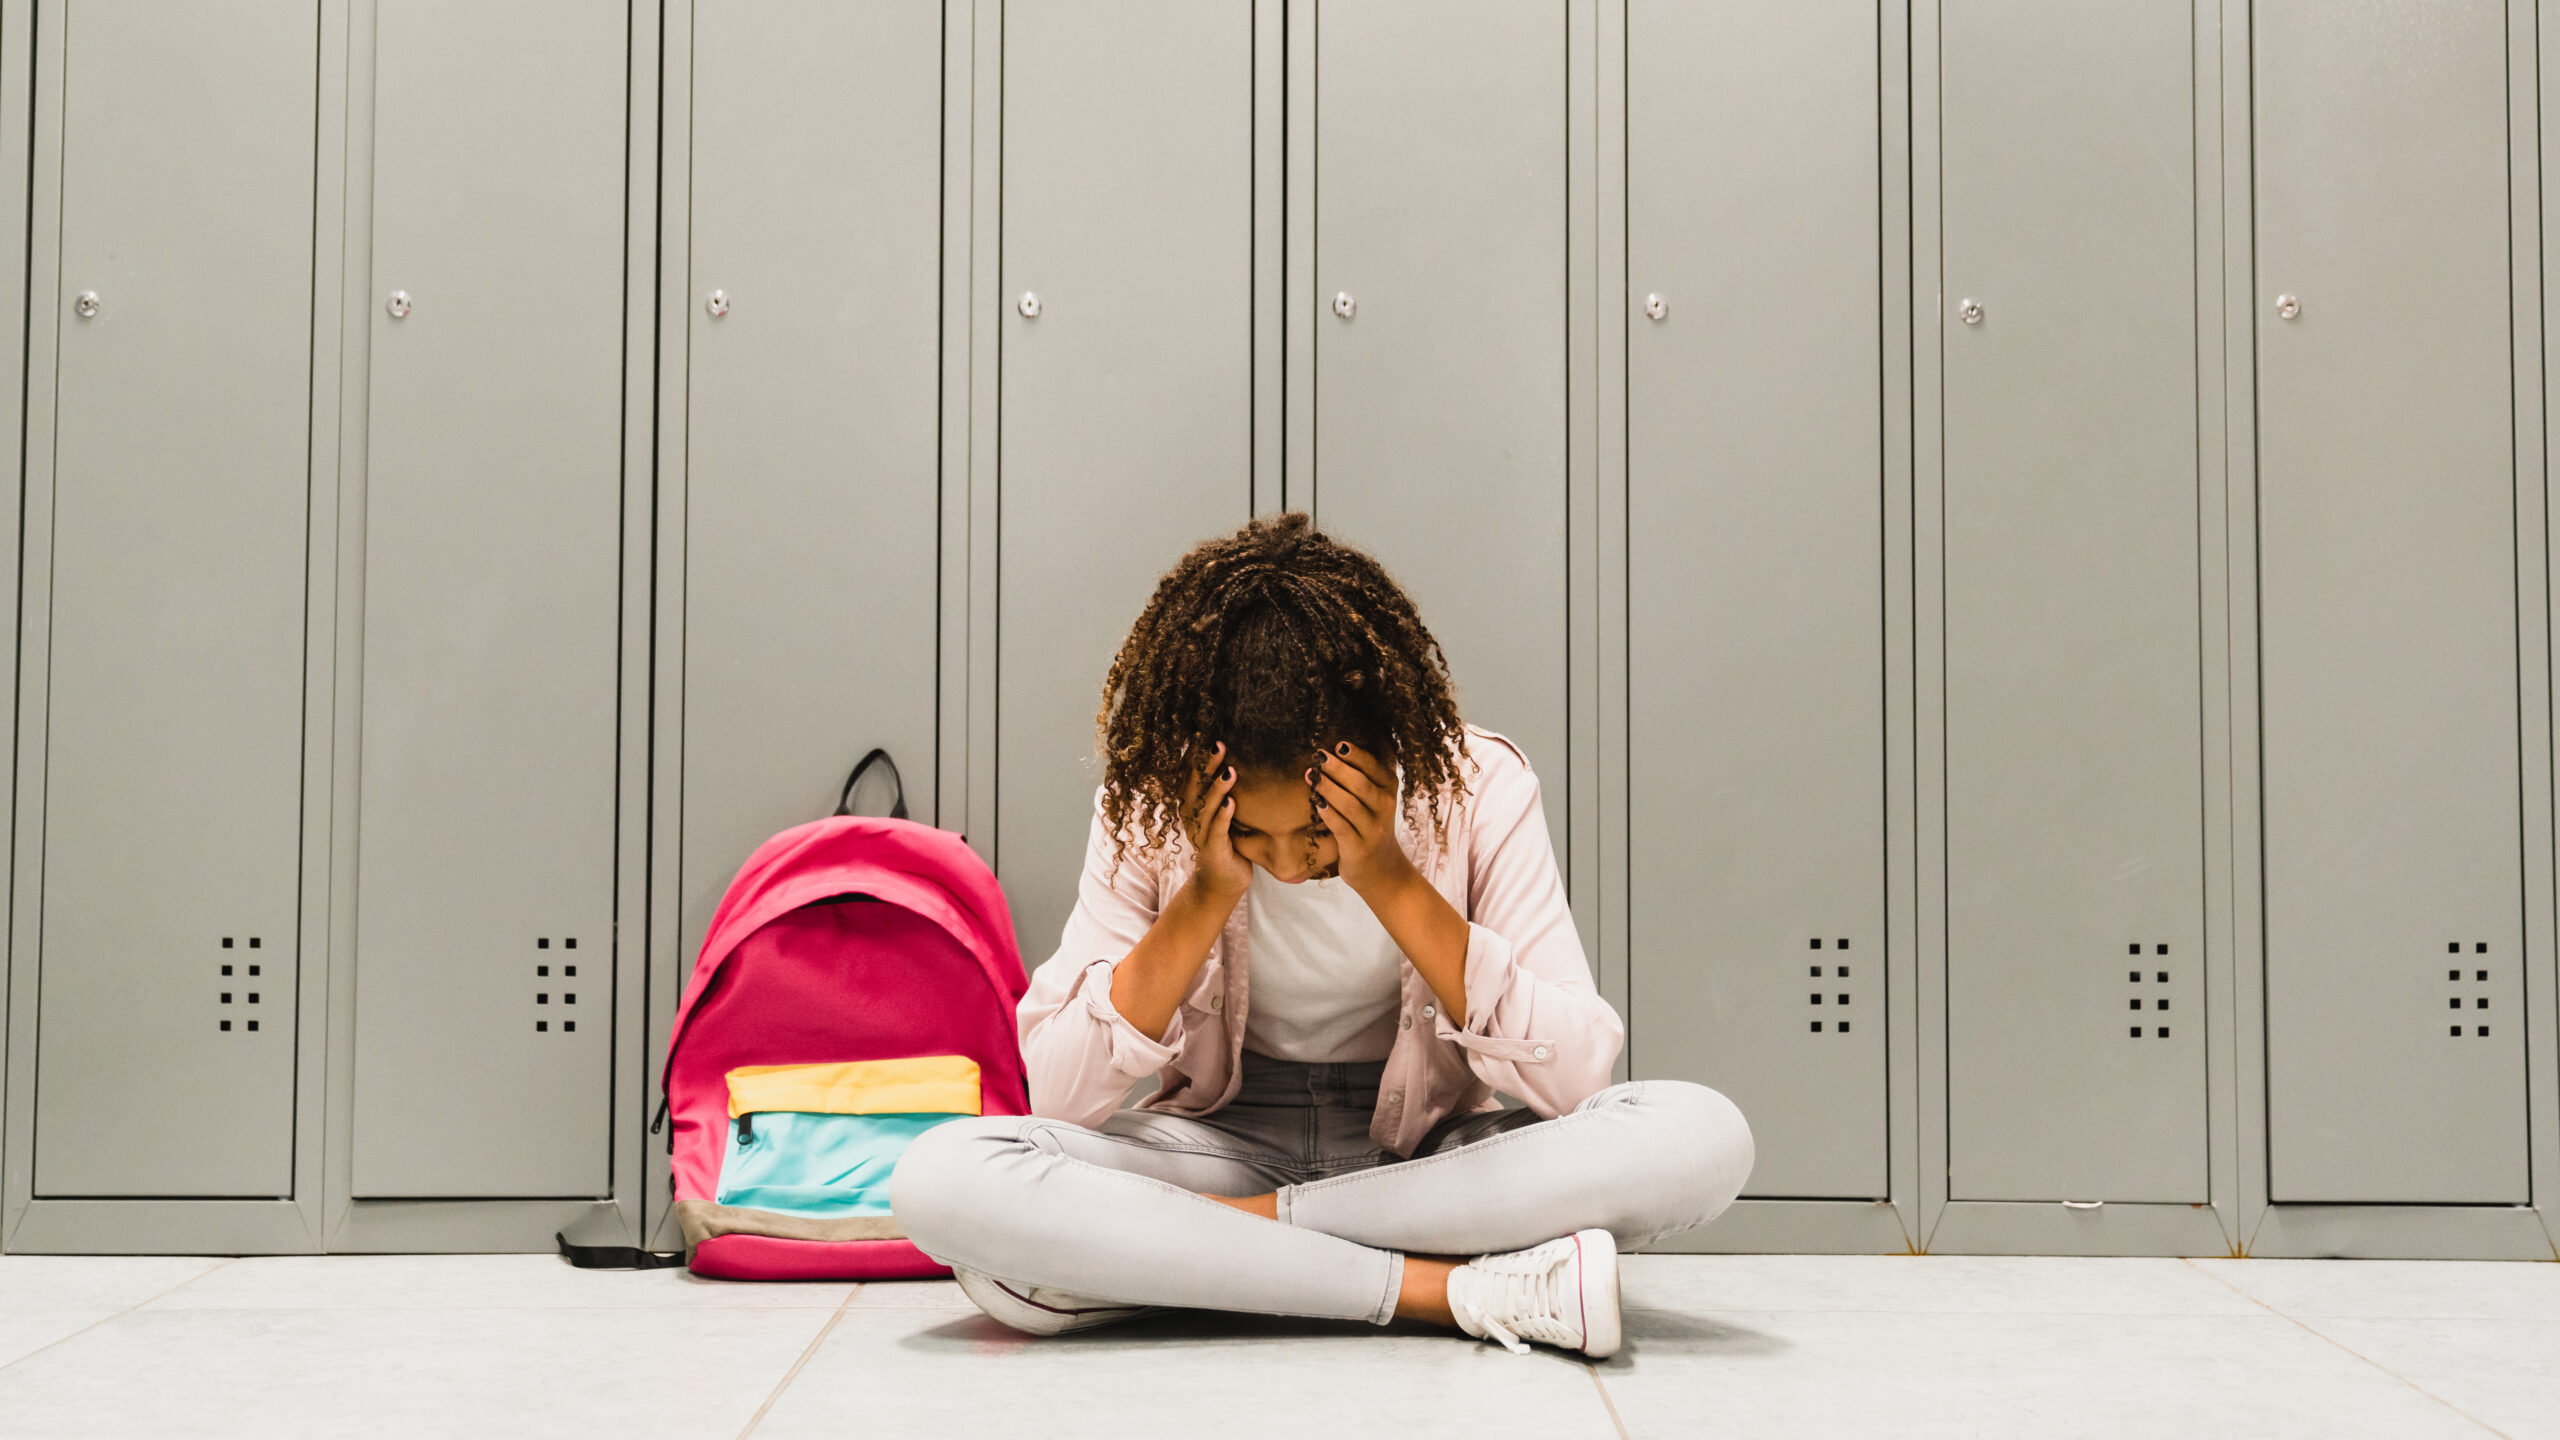 Examining Back-to-School Anxiety: How Students Can Cope